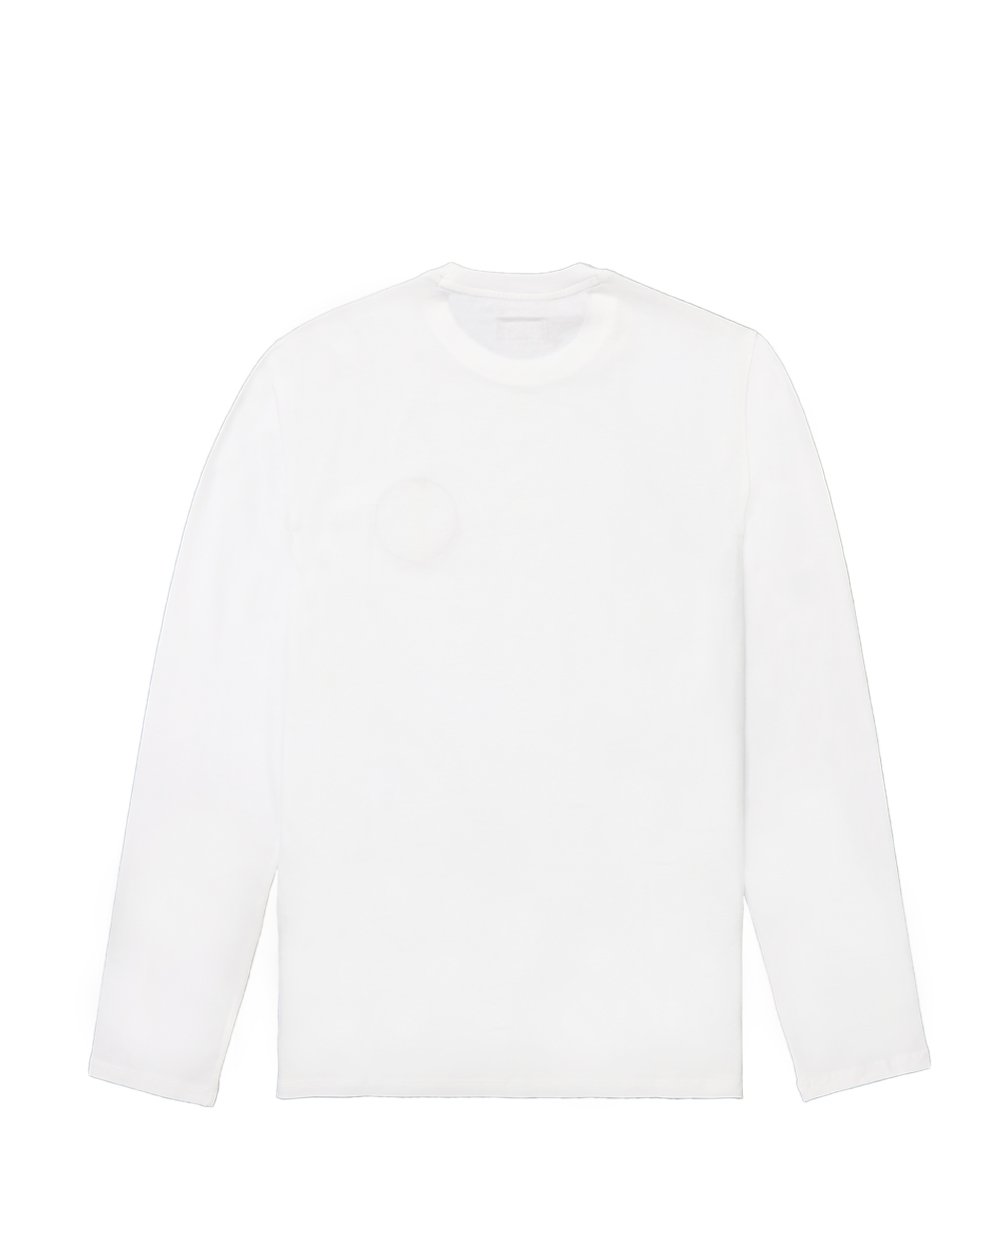 Cotton Logo Crew Neck Straight Long Sleeve T-Shirt - ISSI Outlet